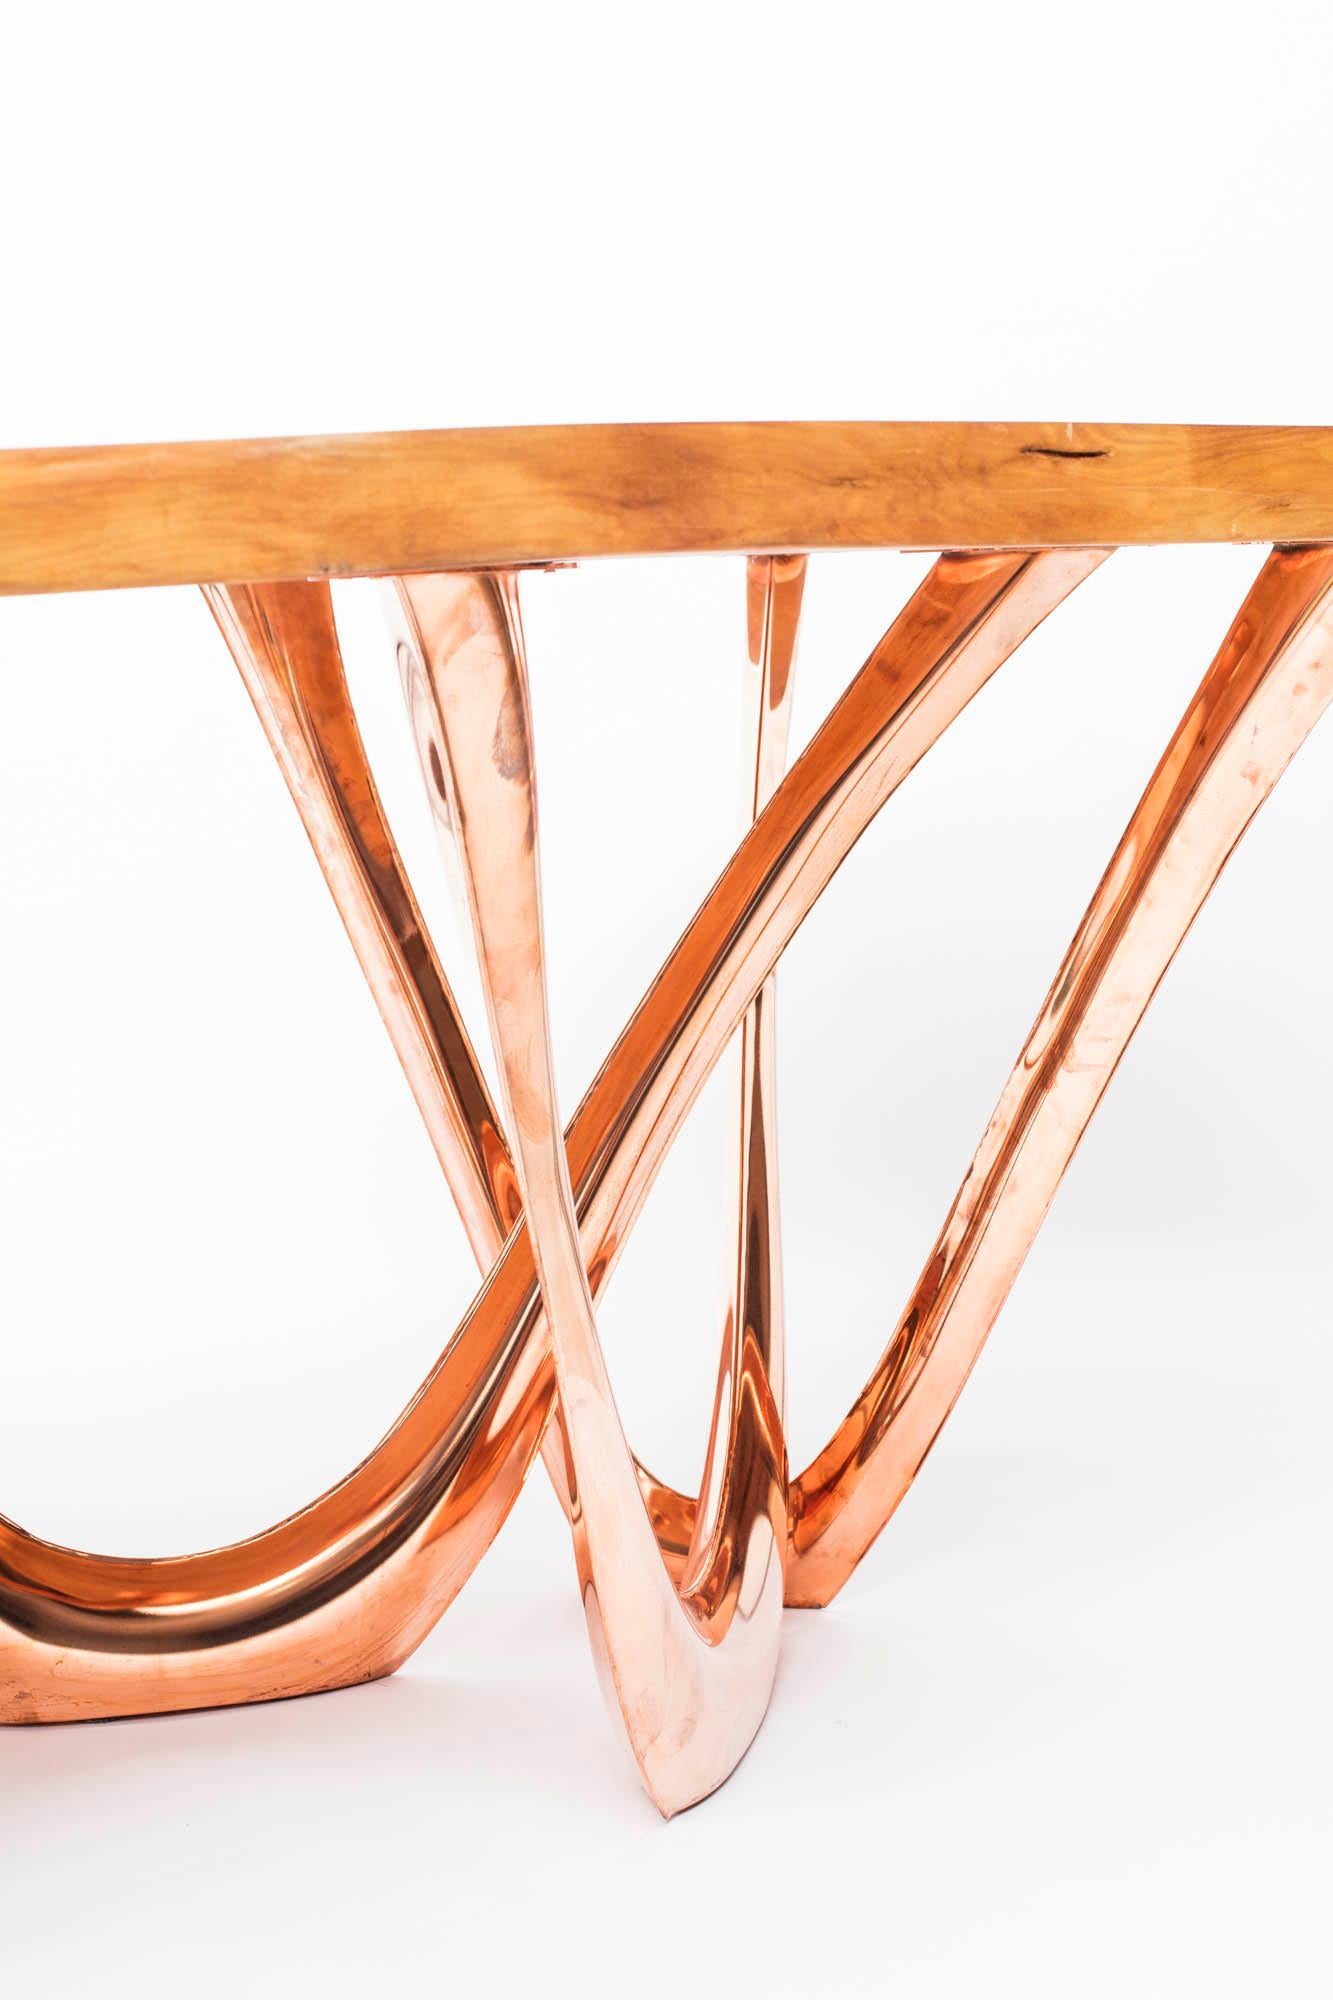 G-Table CU+K in Copper-Cladded Steel with Kauri Wood Top by Zieta In Excellent Condition For Sale In New York, NY